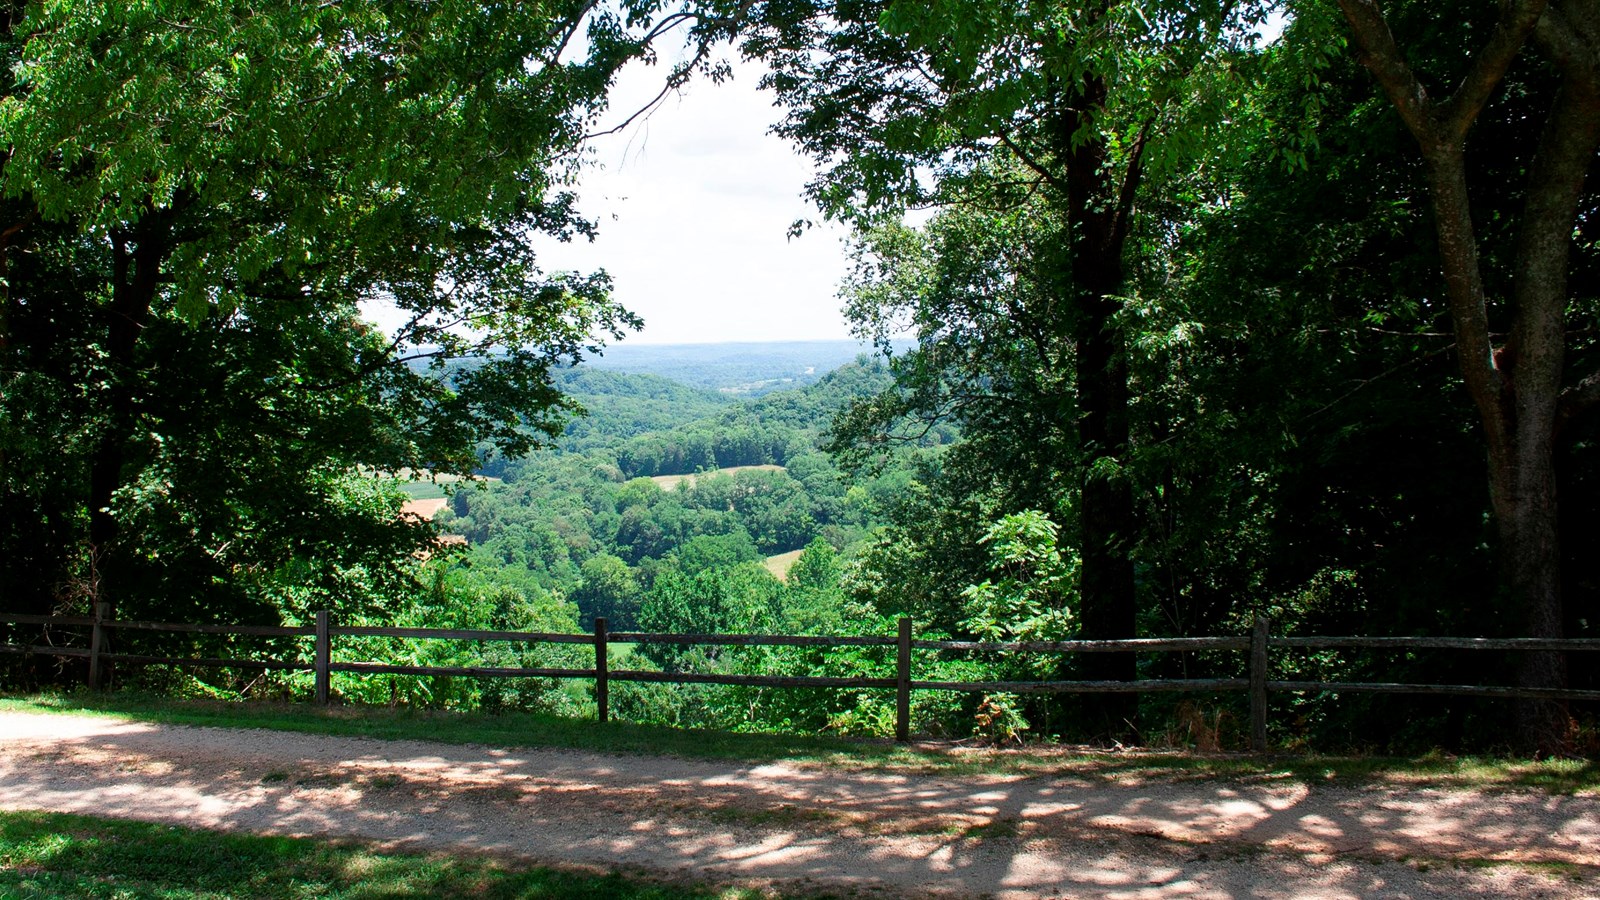 View of countryside framed by dense trees in full summer foliage with plenty of green leaves